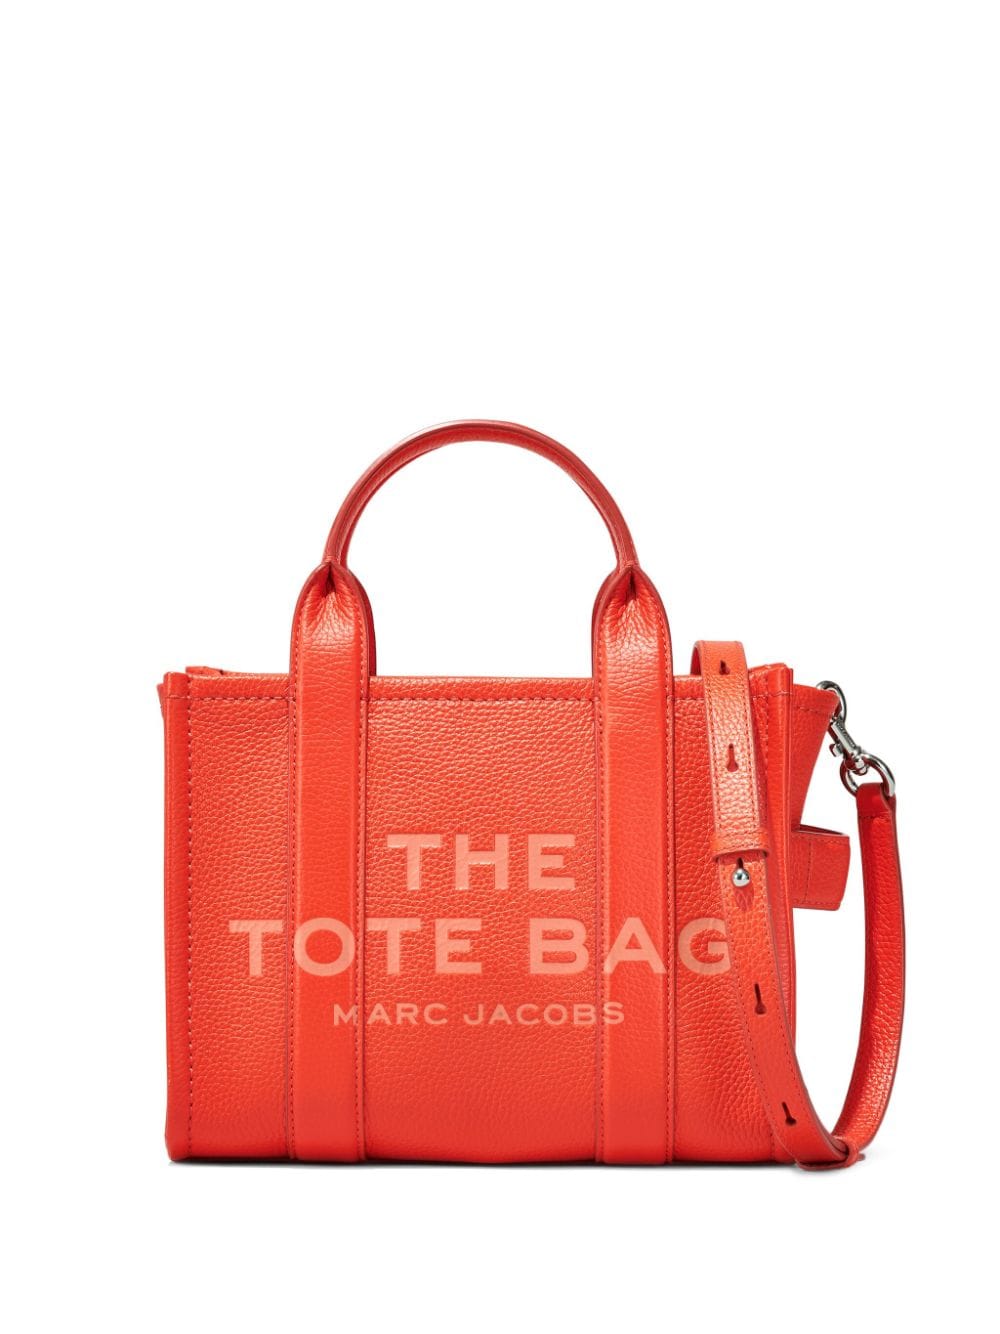 Marc Jacobs The Leather Small Tote bag - Orange von Marc Jacobs